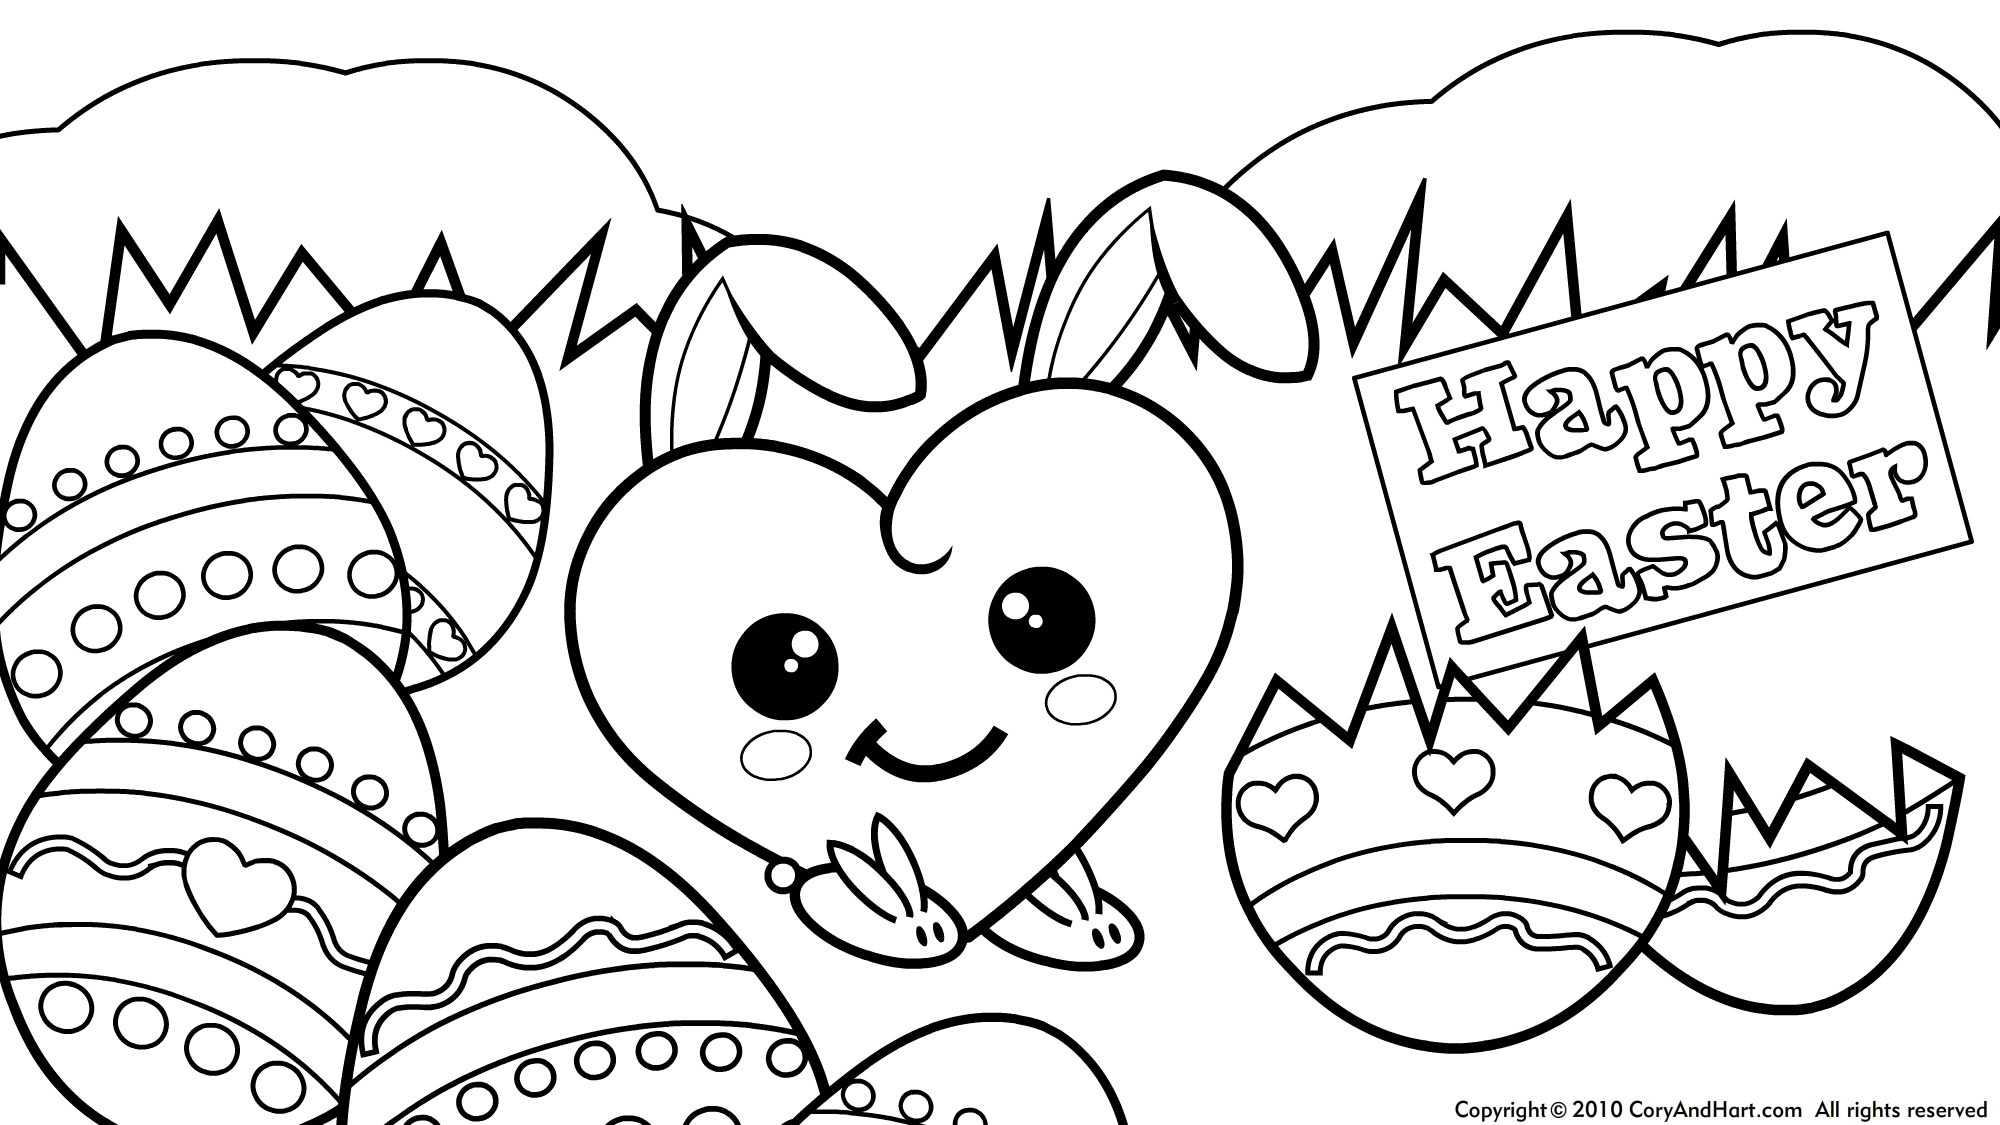 Hard Easter Coloring Pages - High Quality Coloring Pages